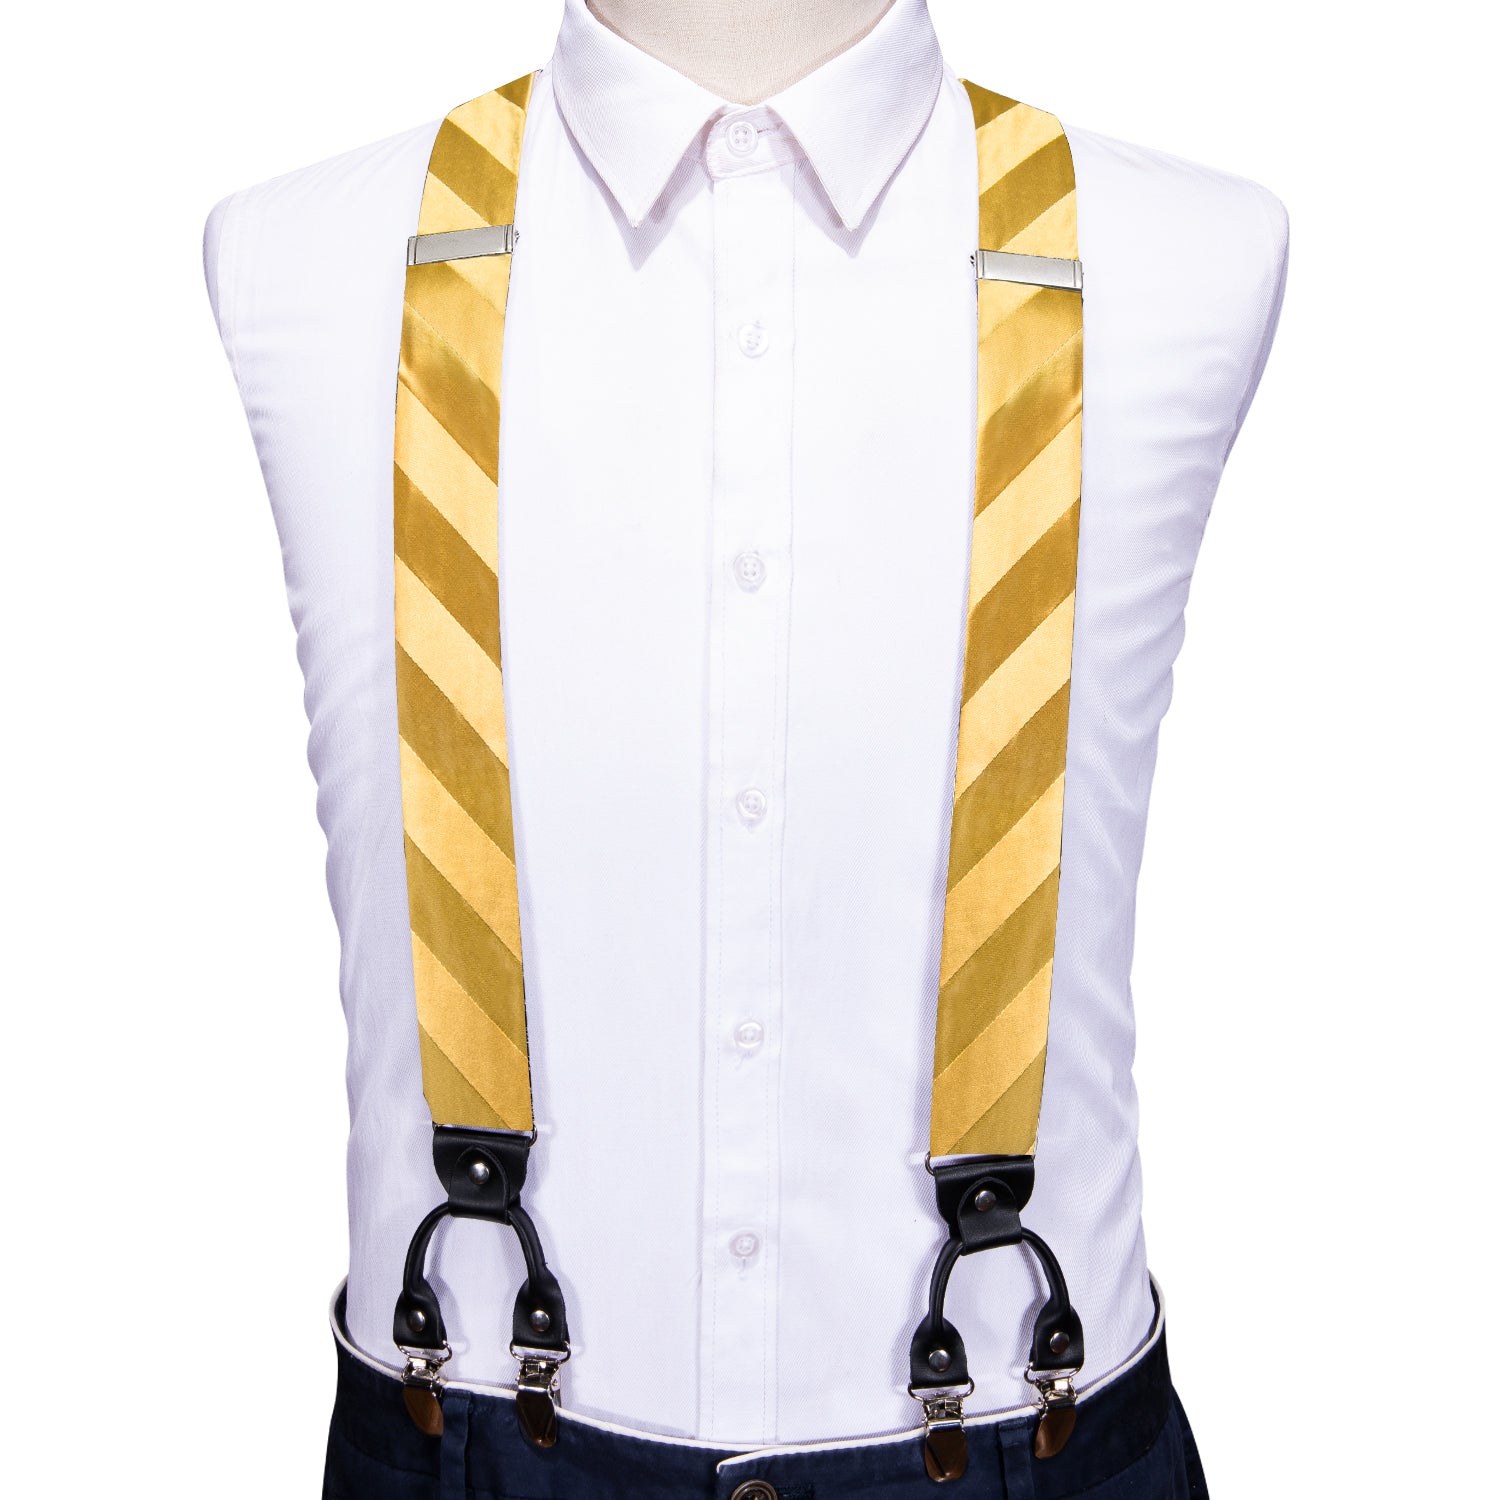 Gold Yellow Striped Y Back Adjustable Bow Tie Suspenders Set